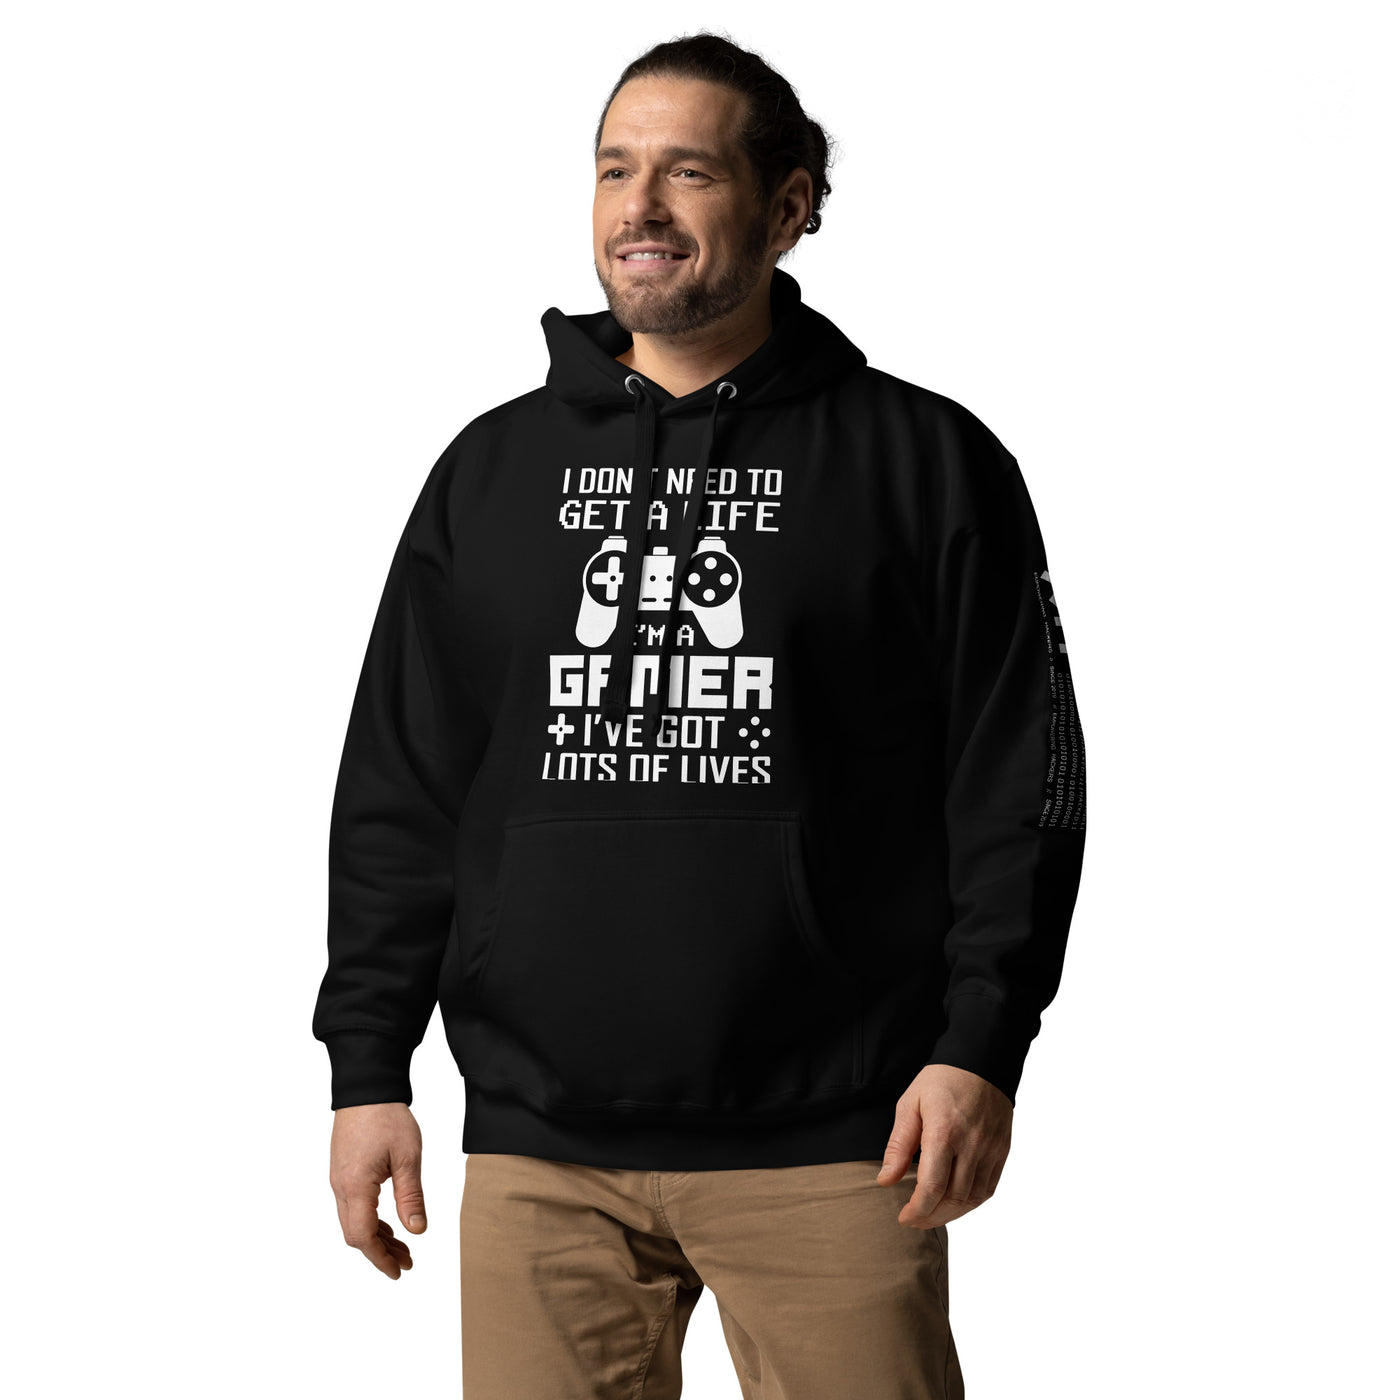 I don't need to get a life, I've already got lots of lives - Unisex Hoodie